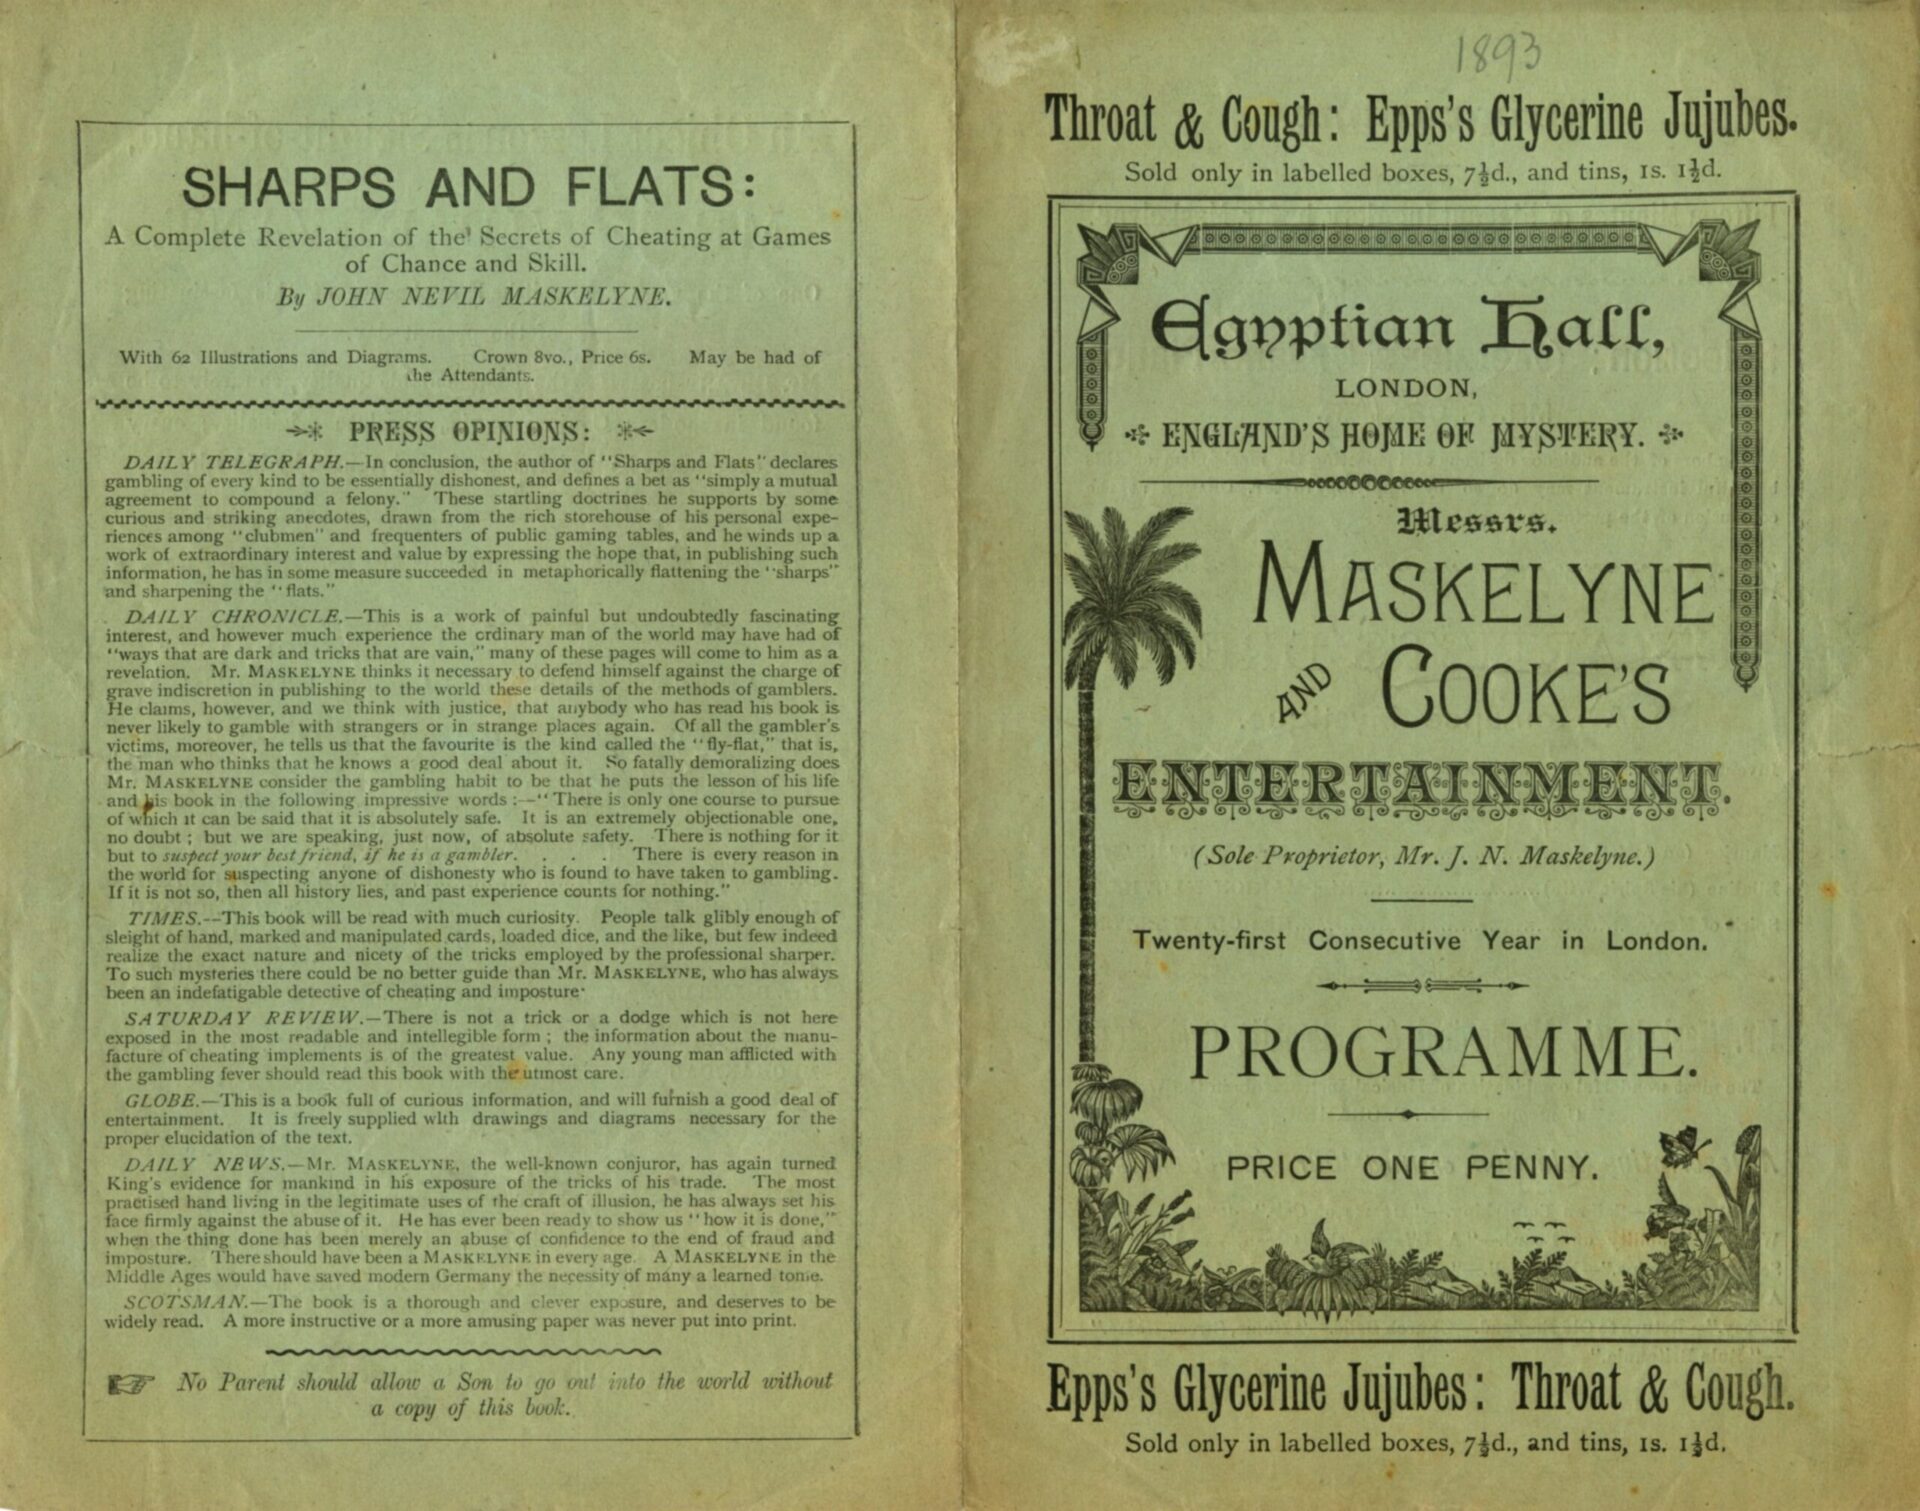 Maskelyne and Cooke programme for the Egyptian Hall, 21st consecutive year